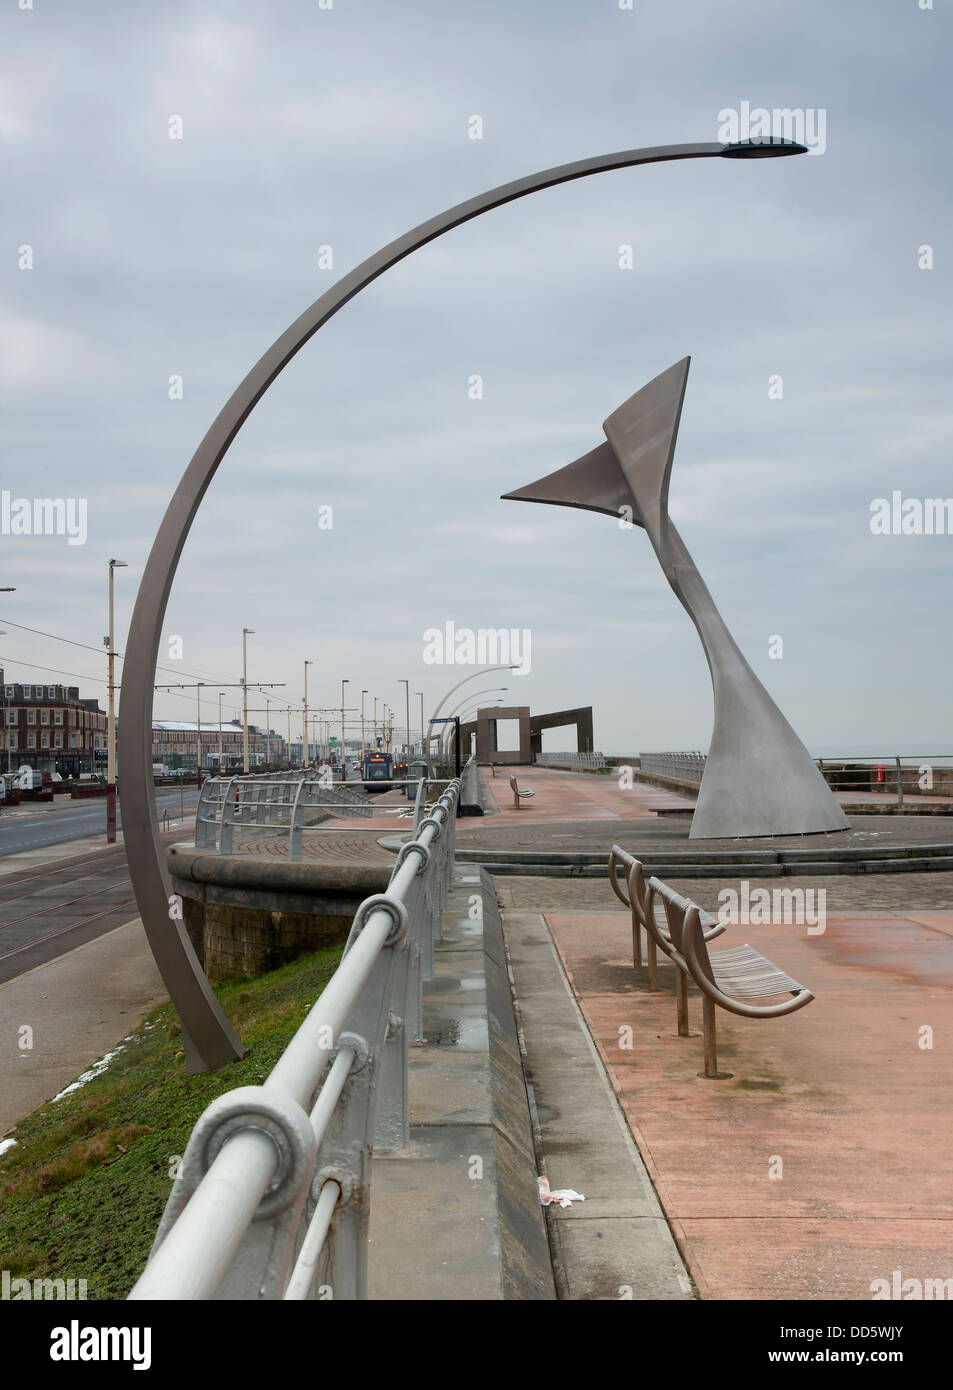 Curved art deco style stainless steel sculptures on the promenade of blackpools south shore Stock Photo